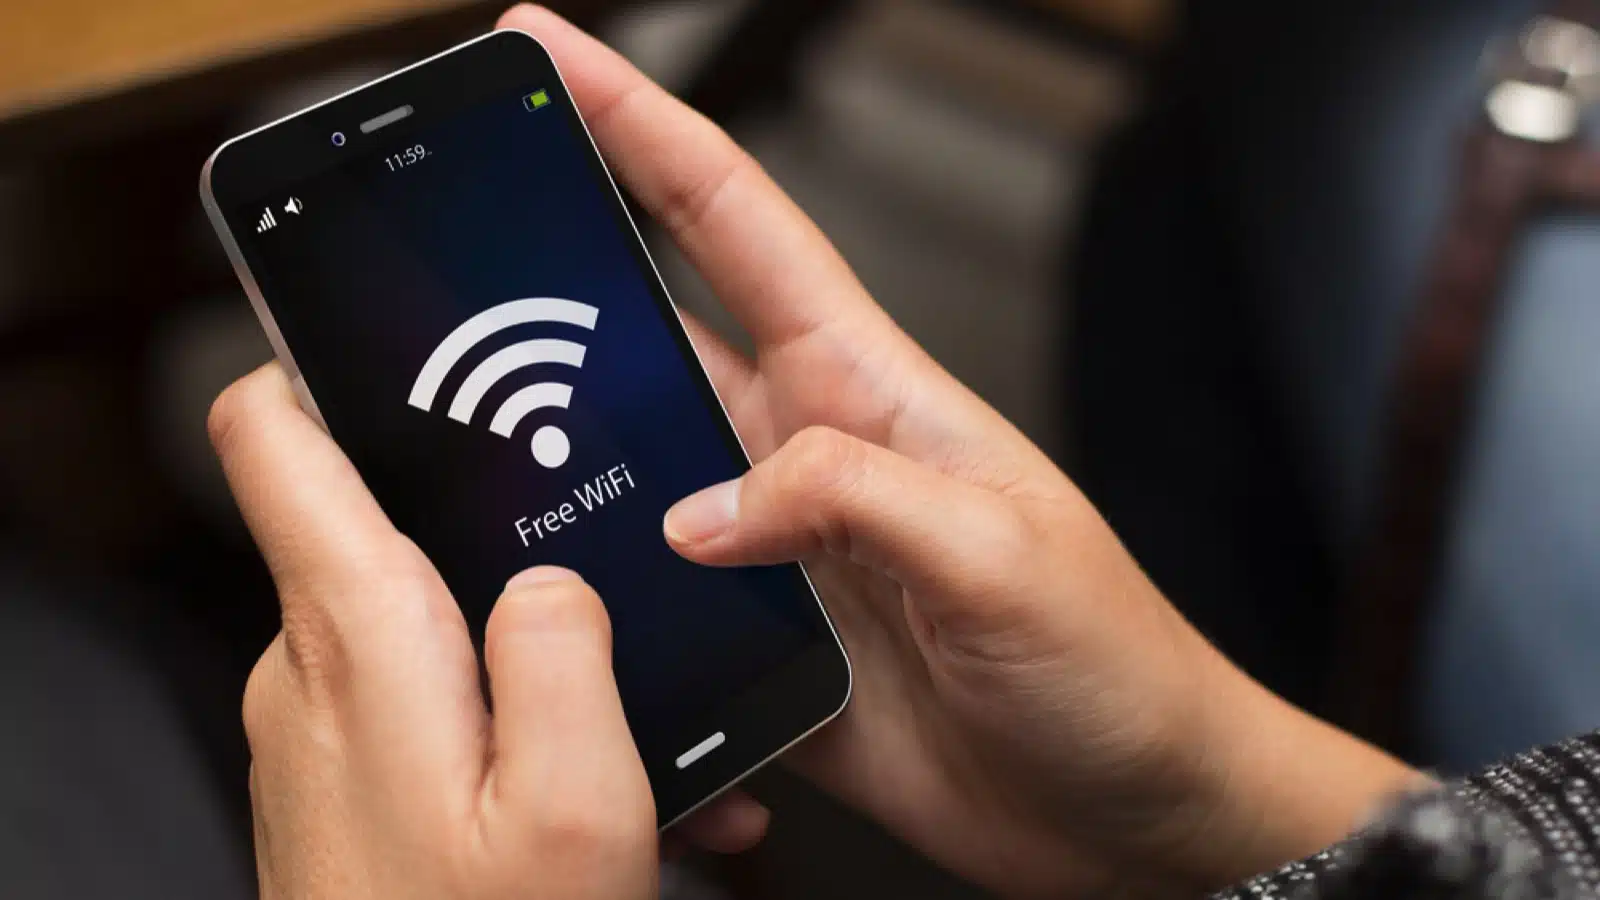 Mobile connecting to WiFI